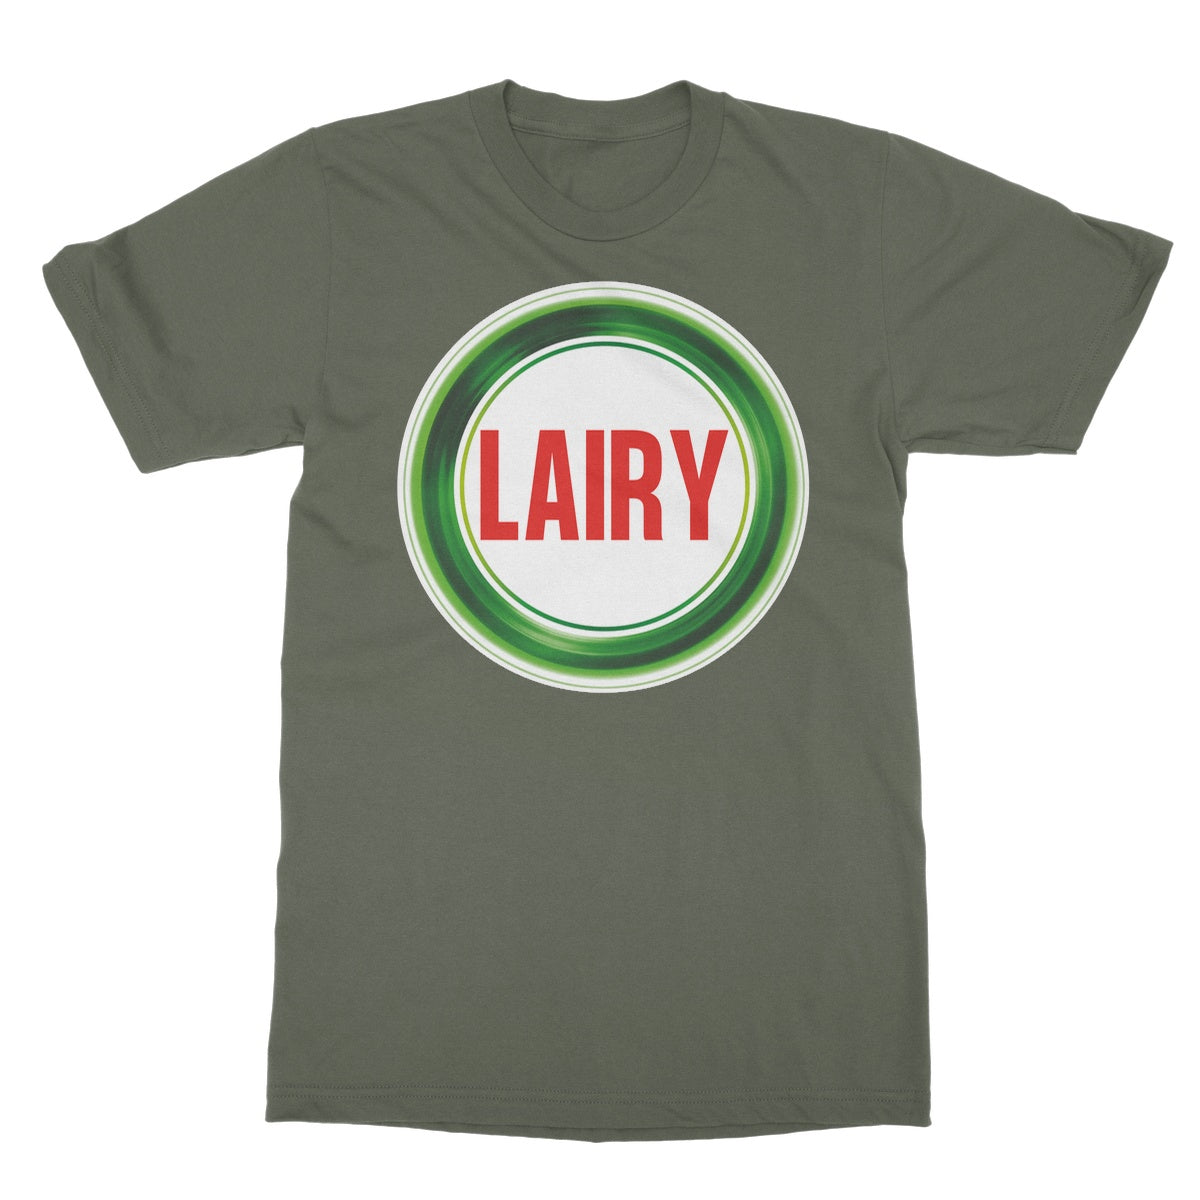 lairy t shirt green